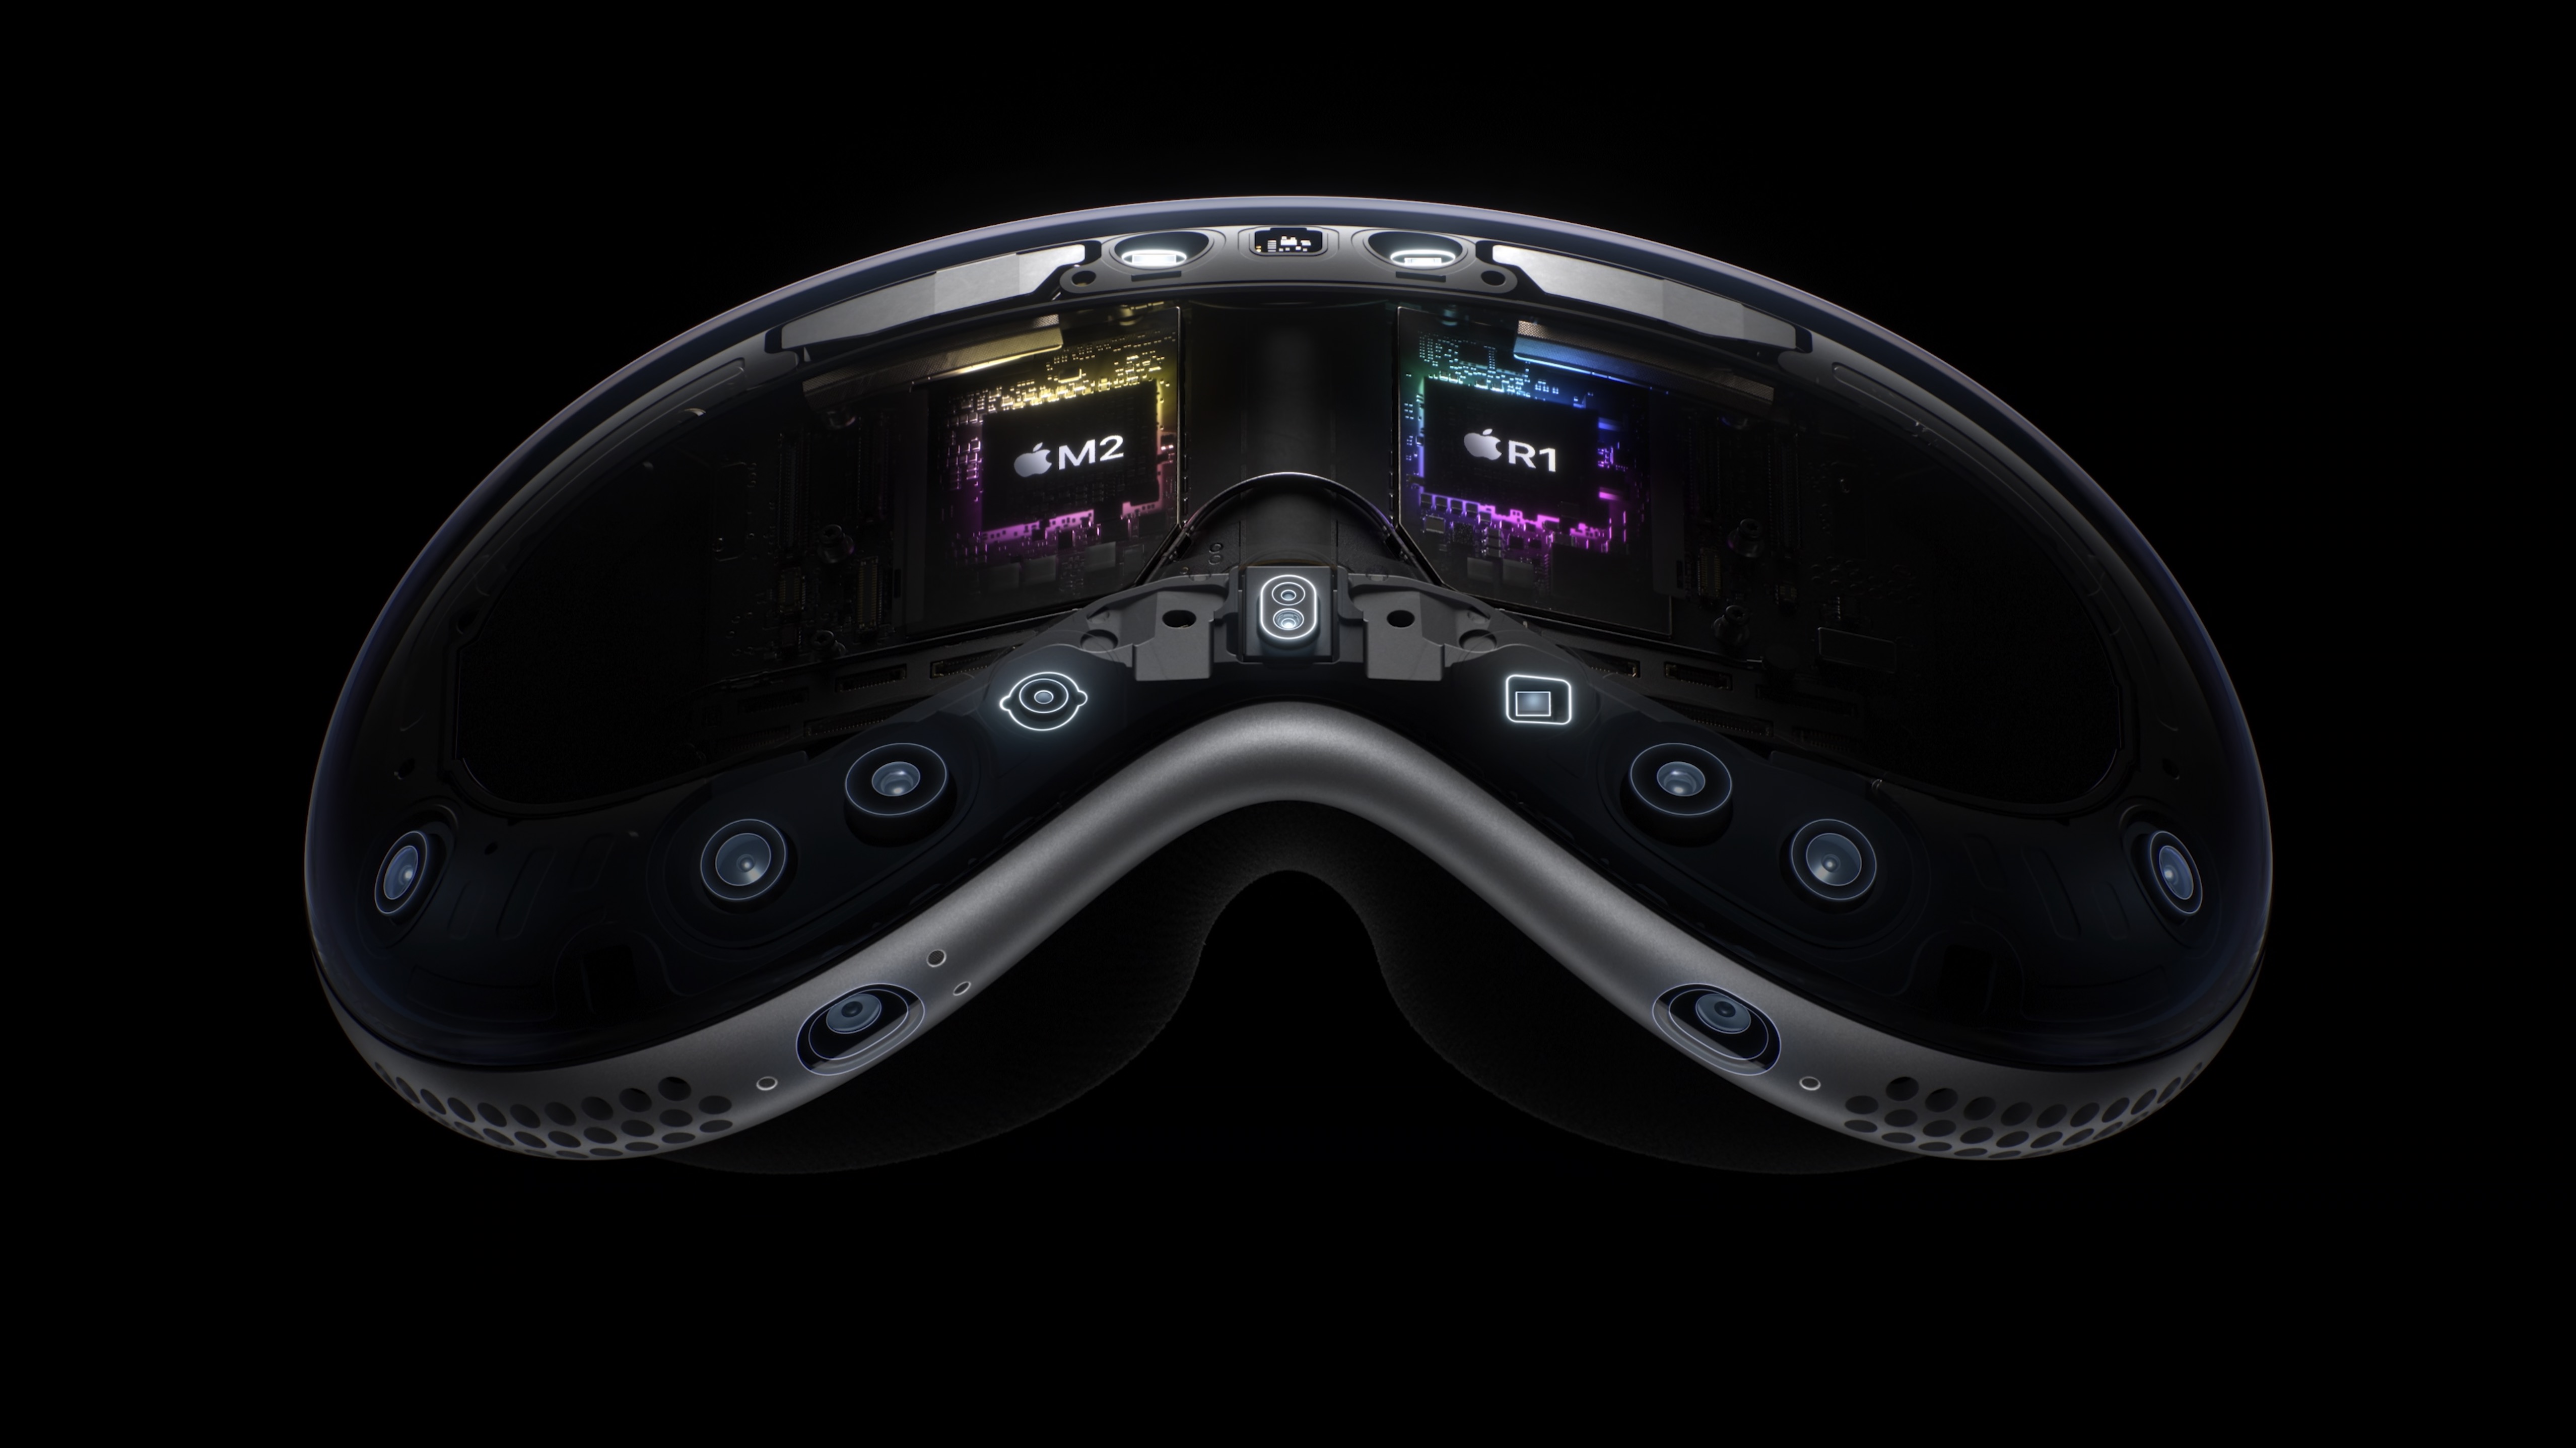 The Vision Pro headset with a focus on the processor inside.